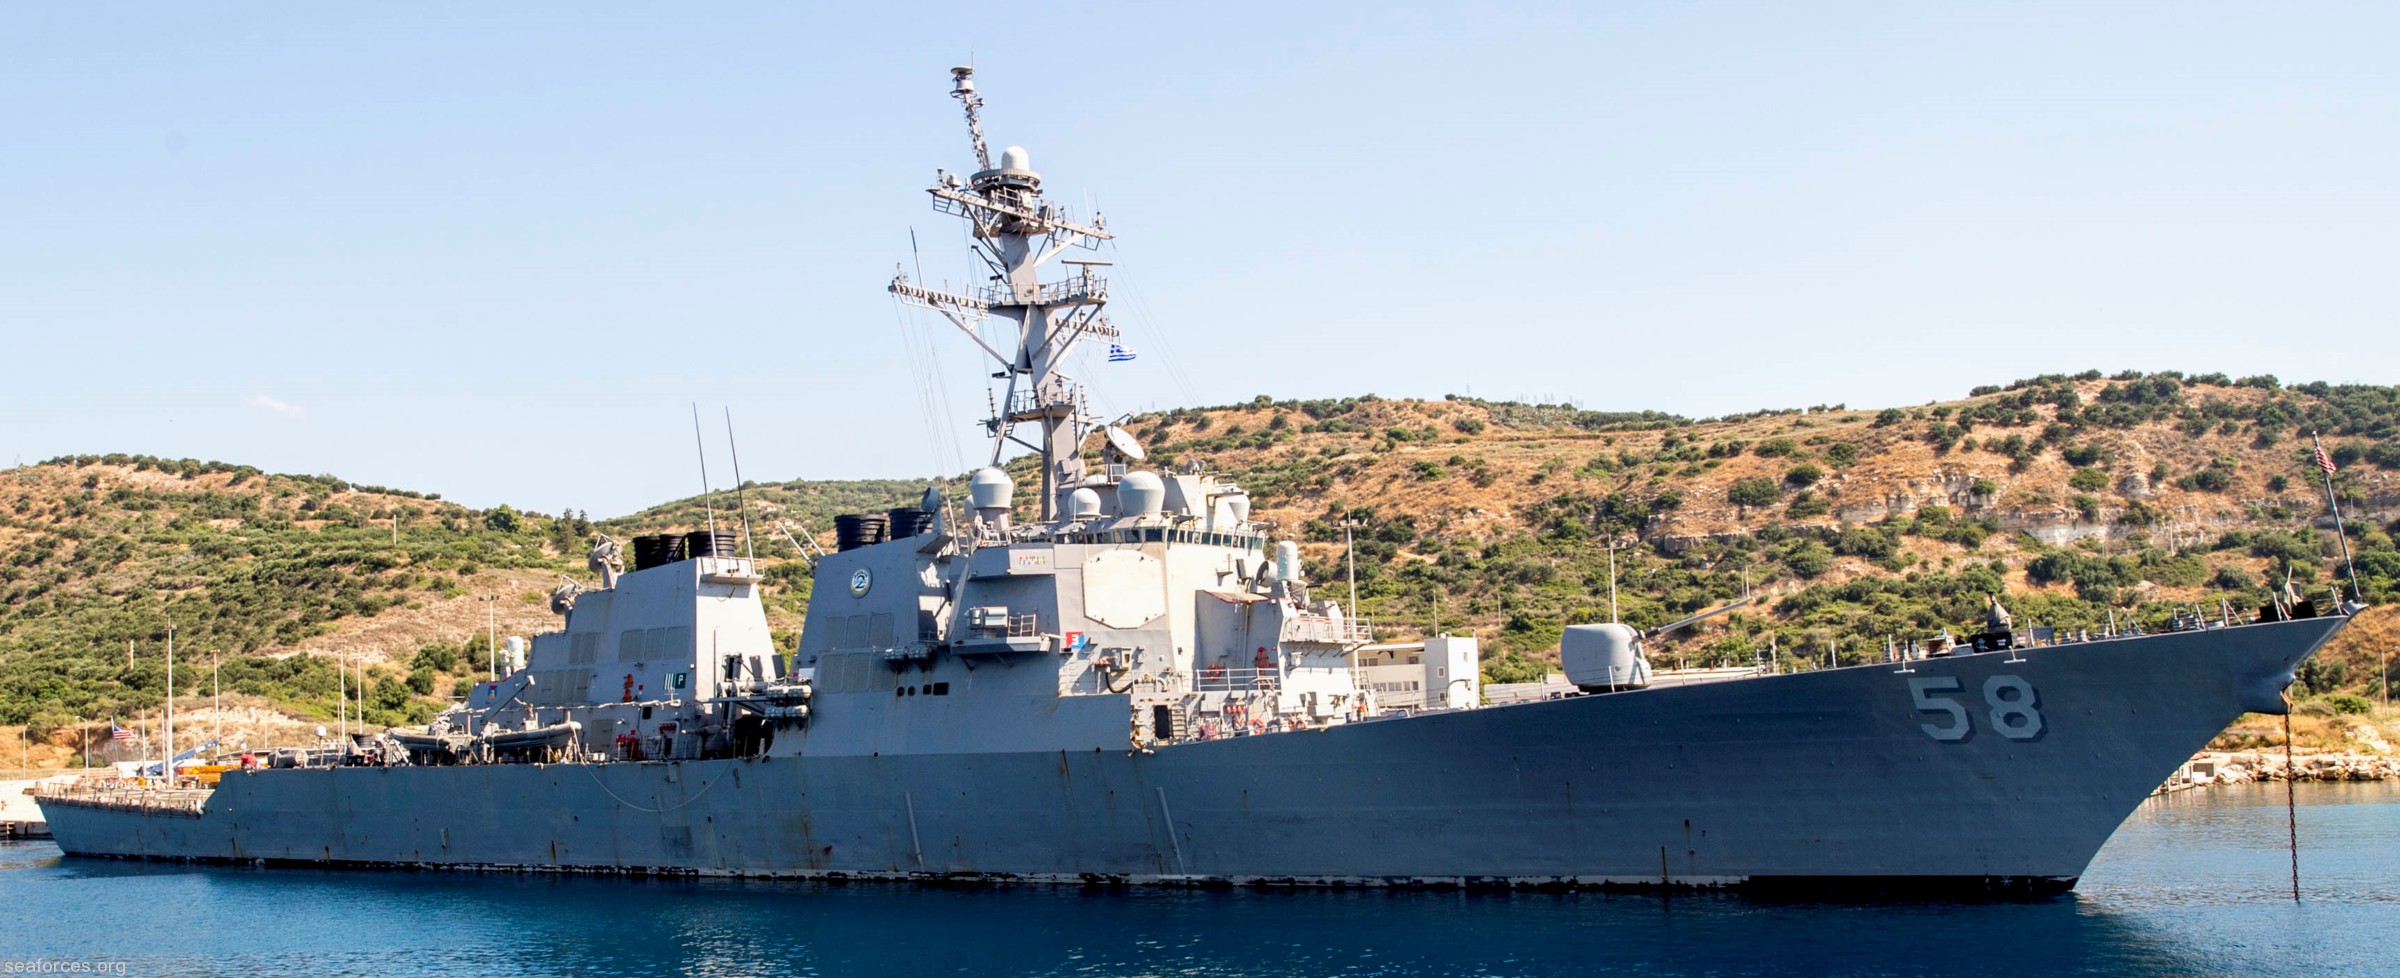 ddg-58 uss laboon guided missile destroyer us navy 11 souda bay crete greece